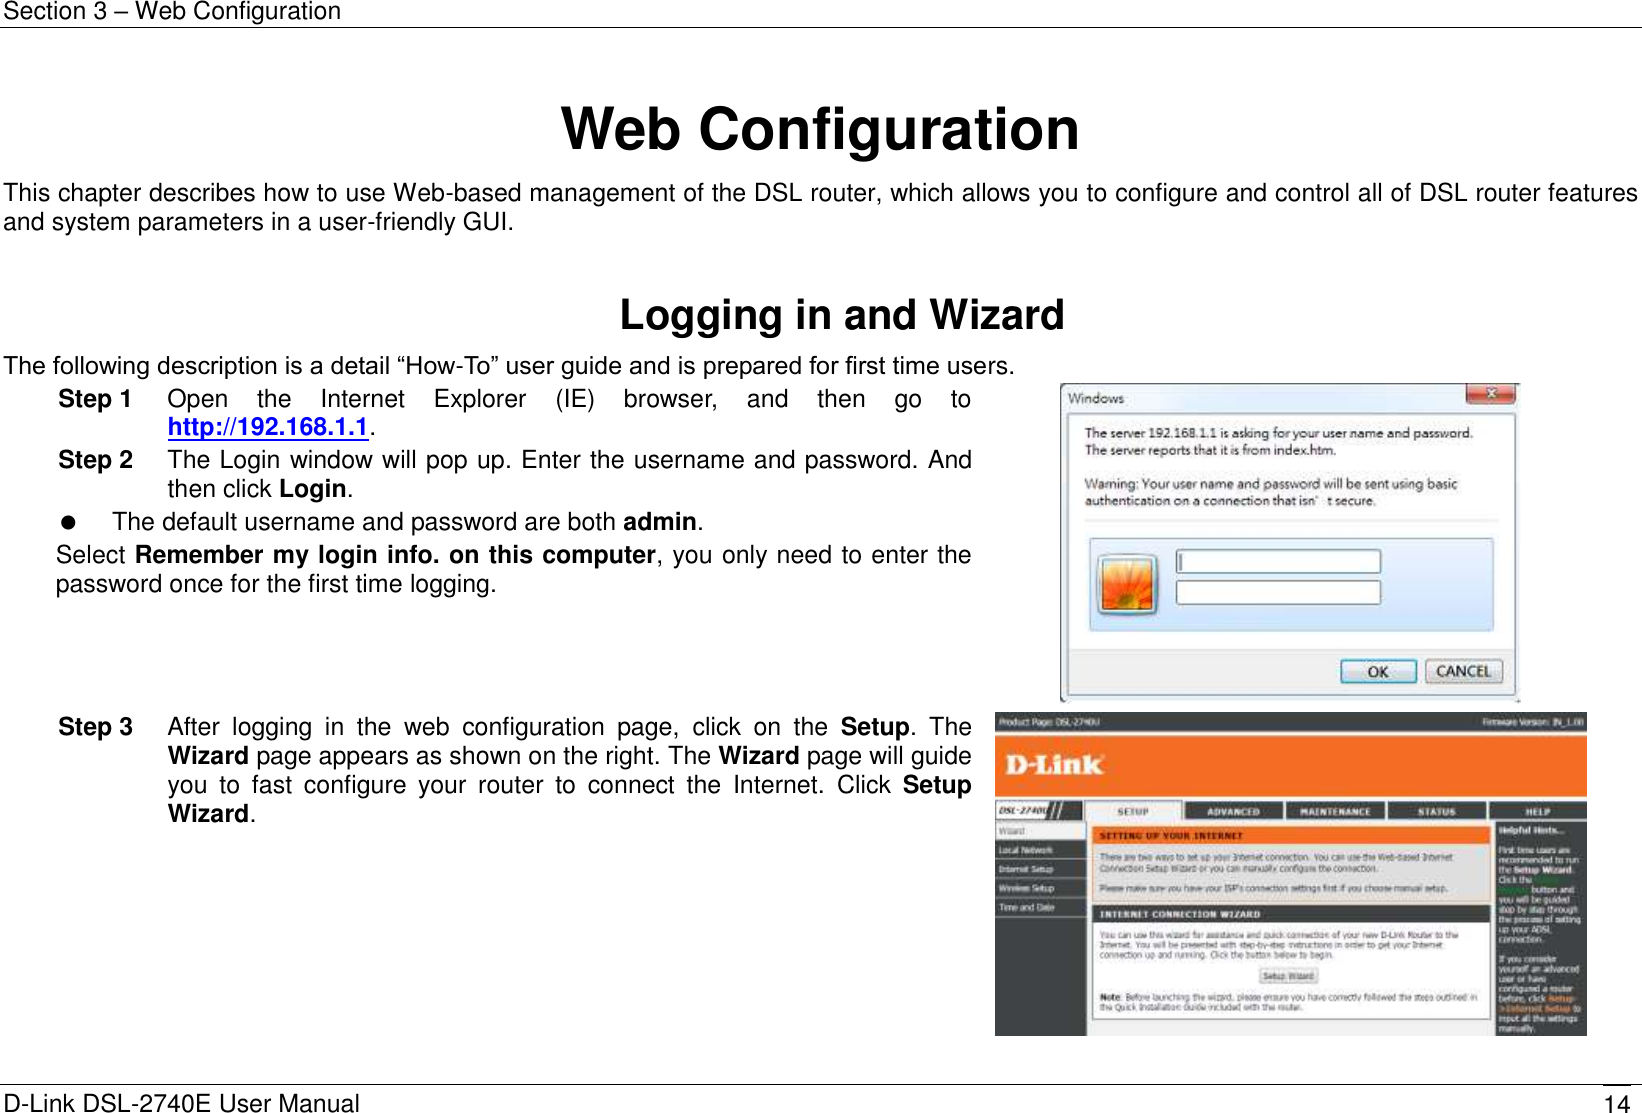 Section 3 – Web Configuration D-Link DSL-2740E User Manual 14 Web Configuration This chapter describes how to use Web-based management of the DSL router, which allows you to configure and control all of DSL router features and system parameters in a user-friendly GUI.  Logging in and Wizard The following description is a detail “How-To” user guide and is prepared for first time users. Step 1  Open  the  Internet  Explorer  (IE)  browser,  and  then  go  to http://192.168.1.1. Step 2  The Login window will pop up. Enter the username and password. And then click Login.   The default username and password are both admin. Select Remember my login info. on this computer, you only need to enter the password once for the first time logging.  Step 3  After  logging  in  the  web  configuration  page,  click  on  the  Setup.  The Wizard page appears as shown on the right. The Wizard page will guide you  to  fast  configure  your  router  to  connect  the  Internet.  Click  Setup Wizard.  